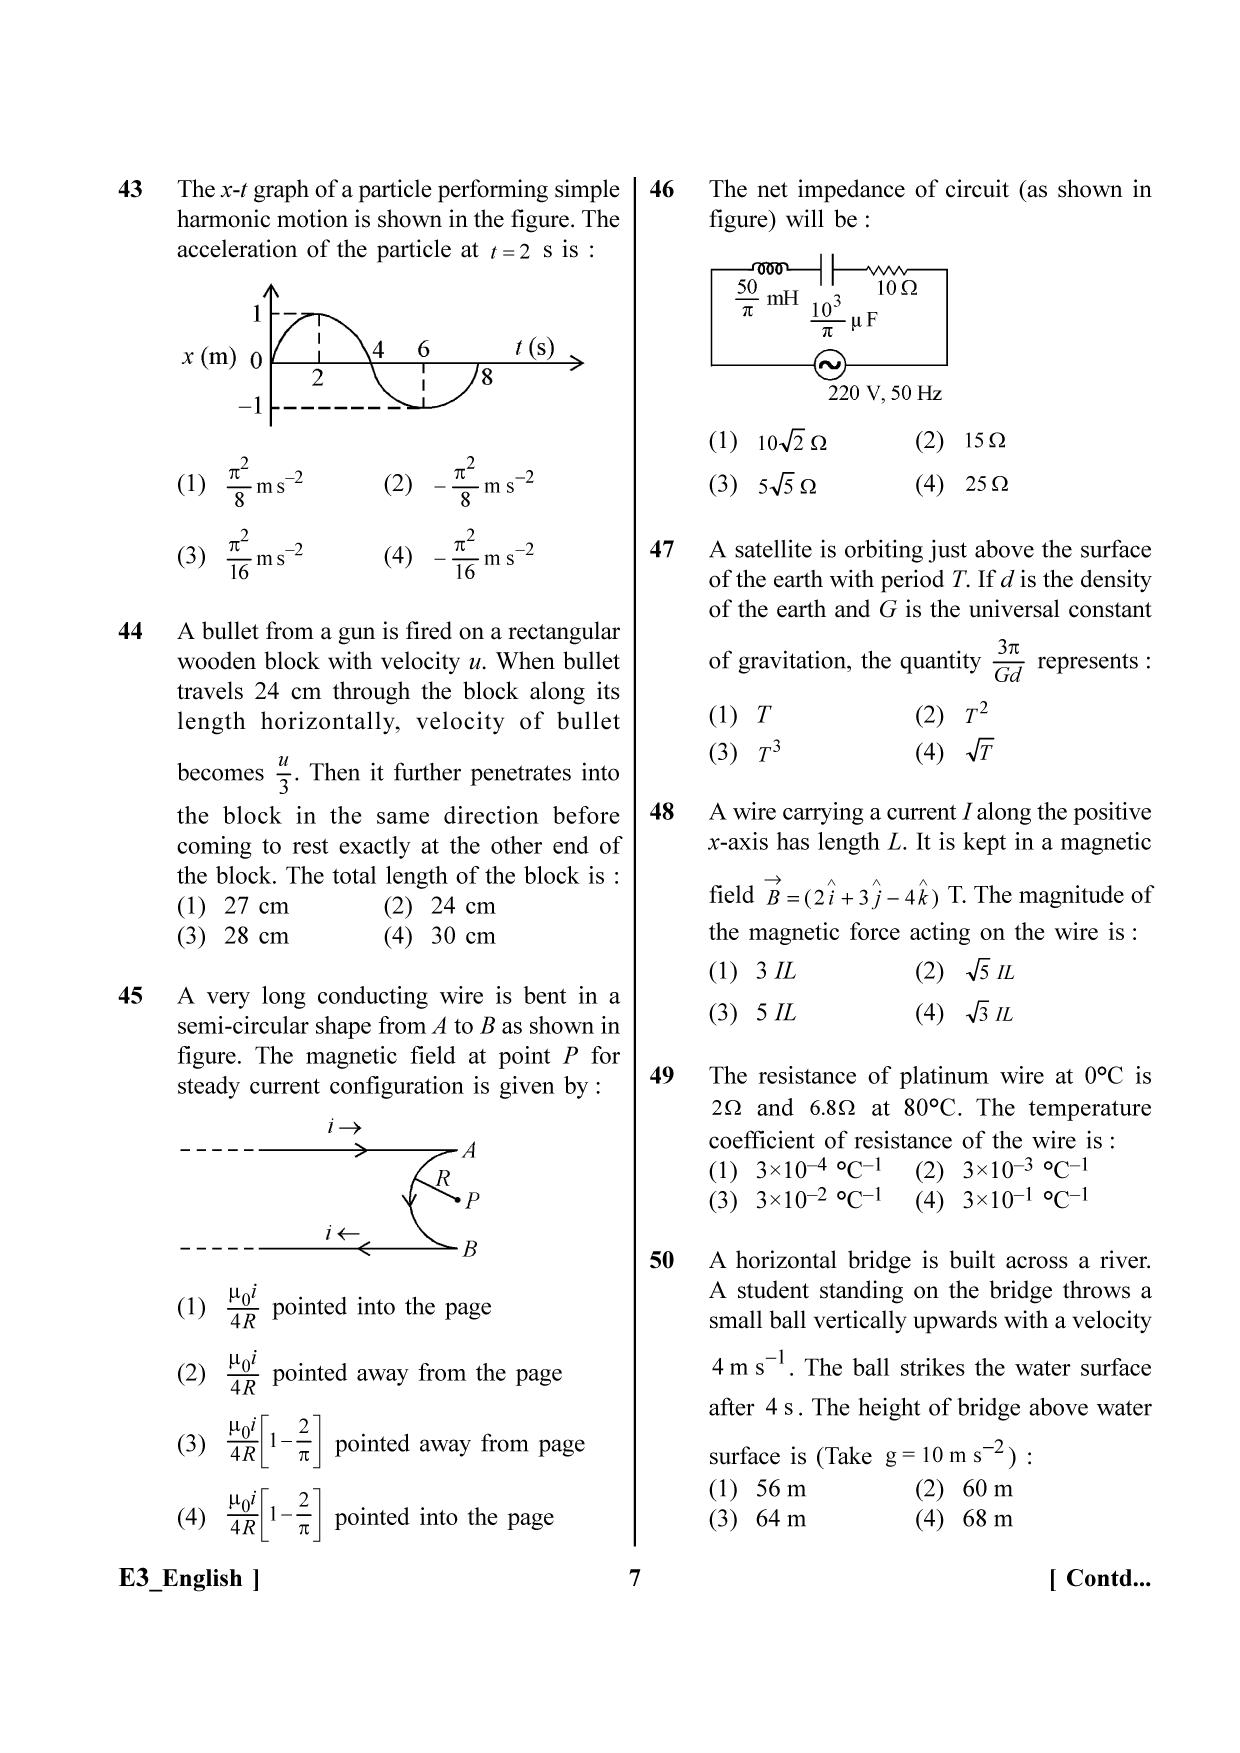 NEET 2023 H4 Official Answer Key - Page 7